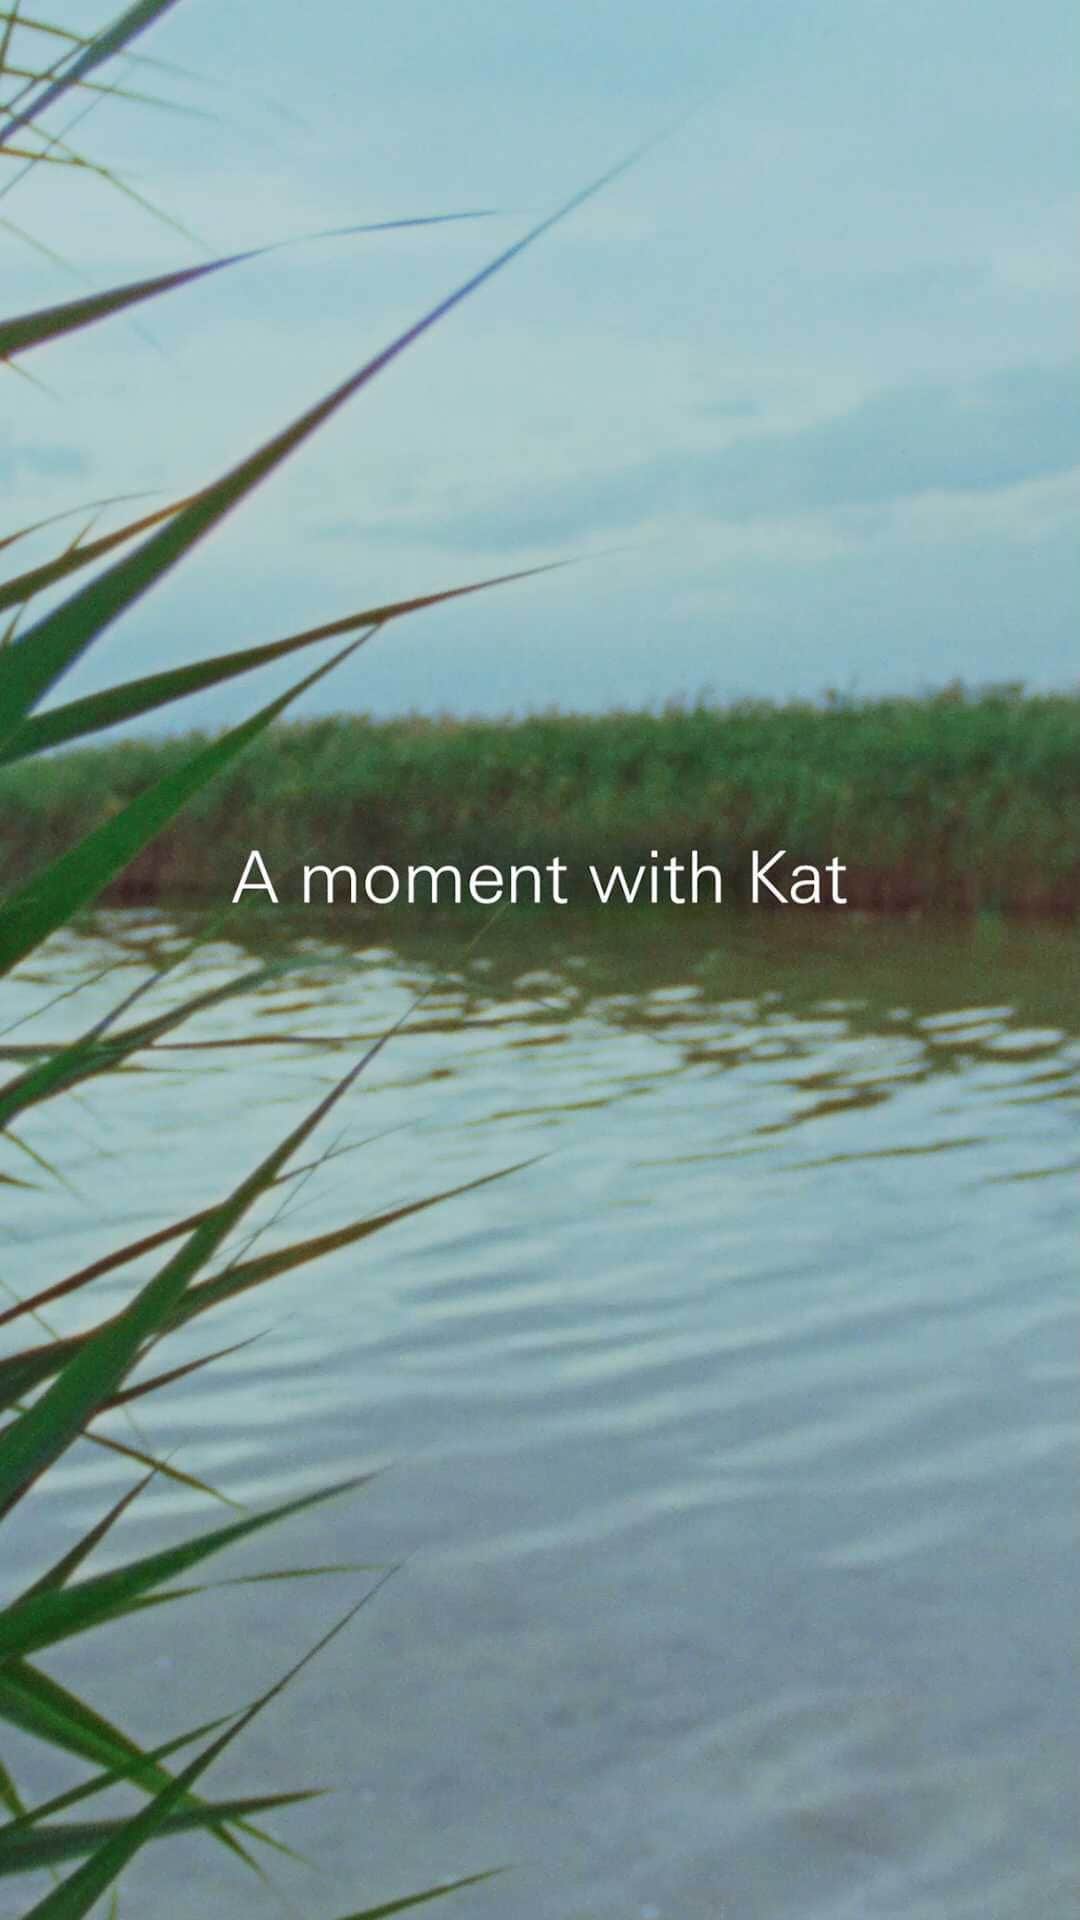 MYKITAのインスタグラム：「A moment with Kat - the co-founder and buying director for Labstore London talks about her hunt for nothingness and void, her love for the colour white and how she just wants the regular things in life.  Find the full interview with @kidnapthekitty via link in bio.   Film credits: Director @oliver_mcgarvey  DOP @zackspiger  Music @floriantmzeisig  Colourist @delfinamayer.color  Styling @alisavornehm  HMU @susanna_jonas & @in.templum.ophelia」